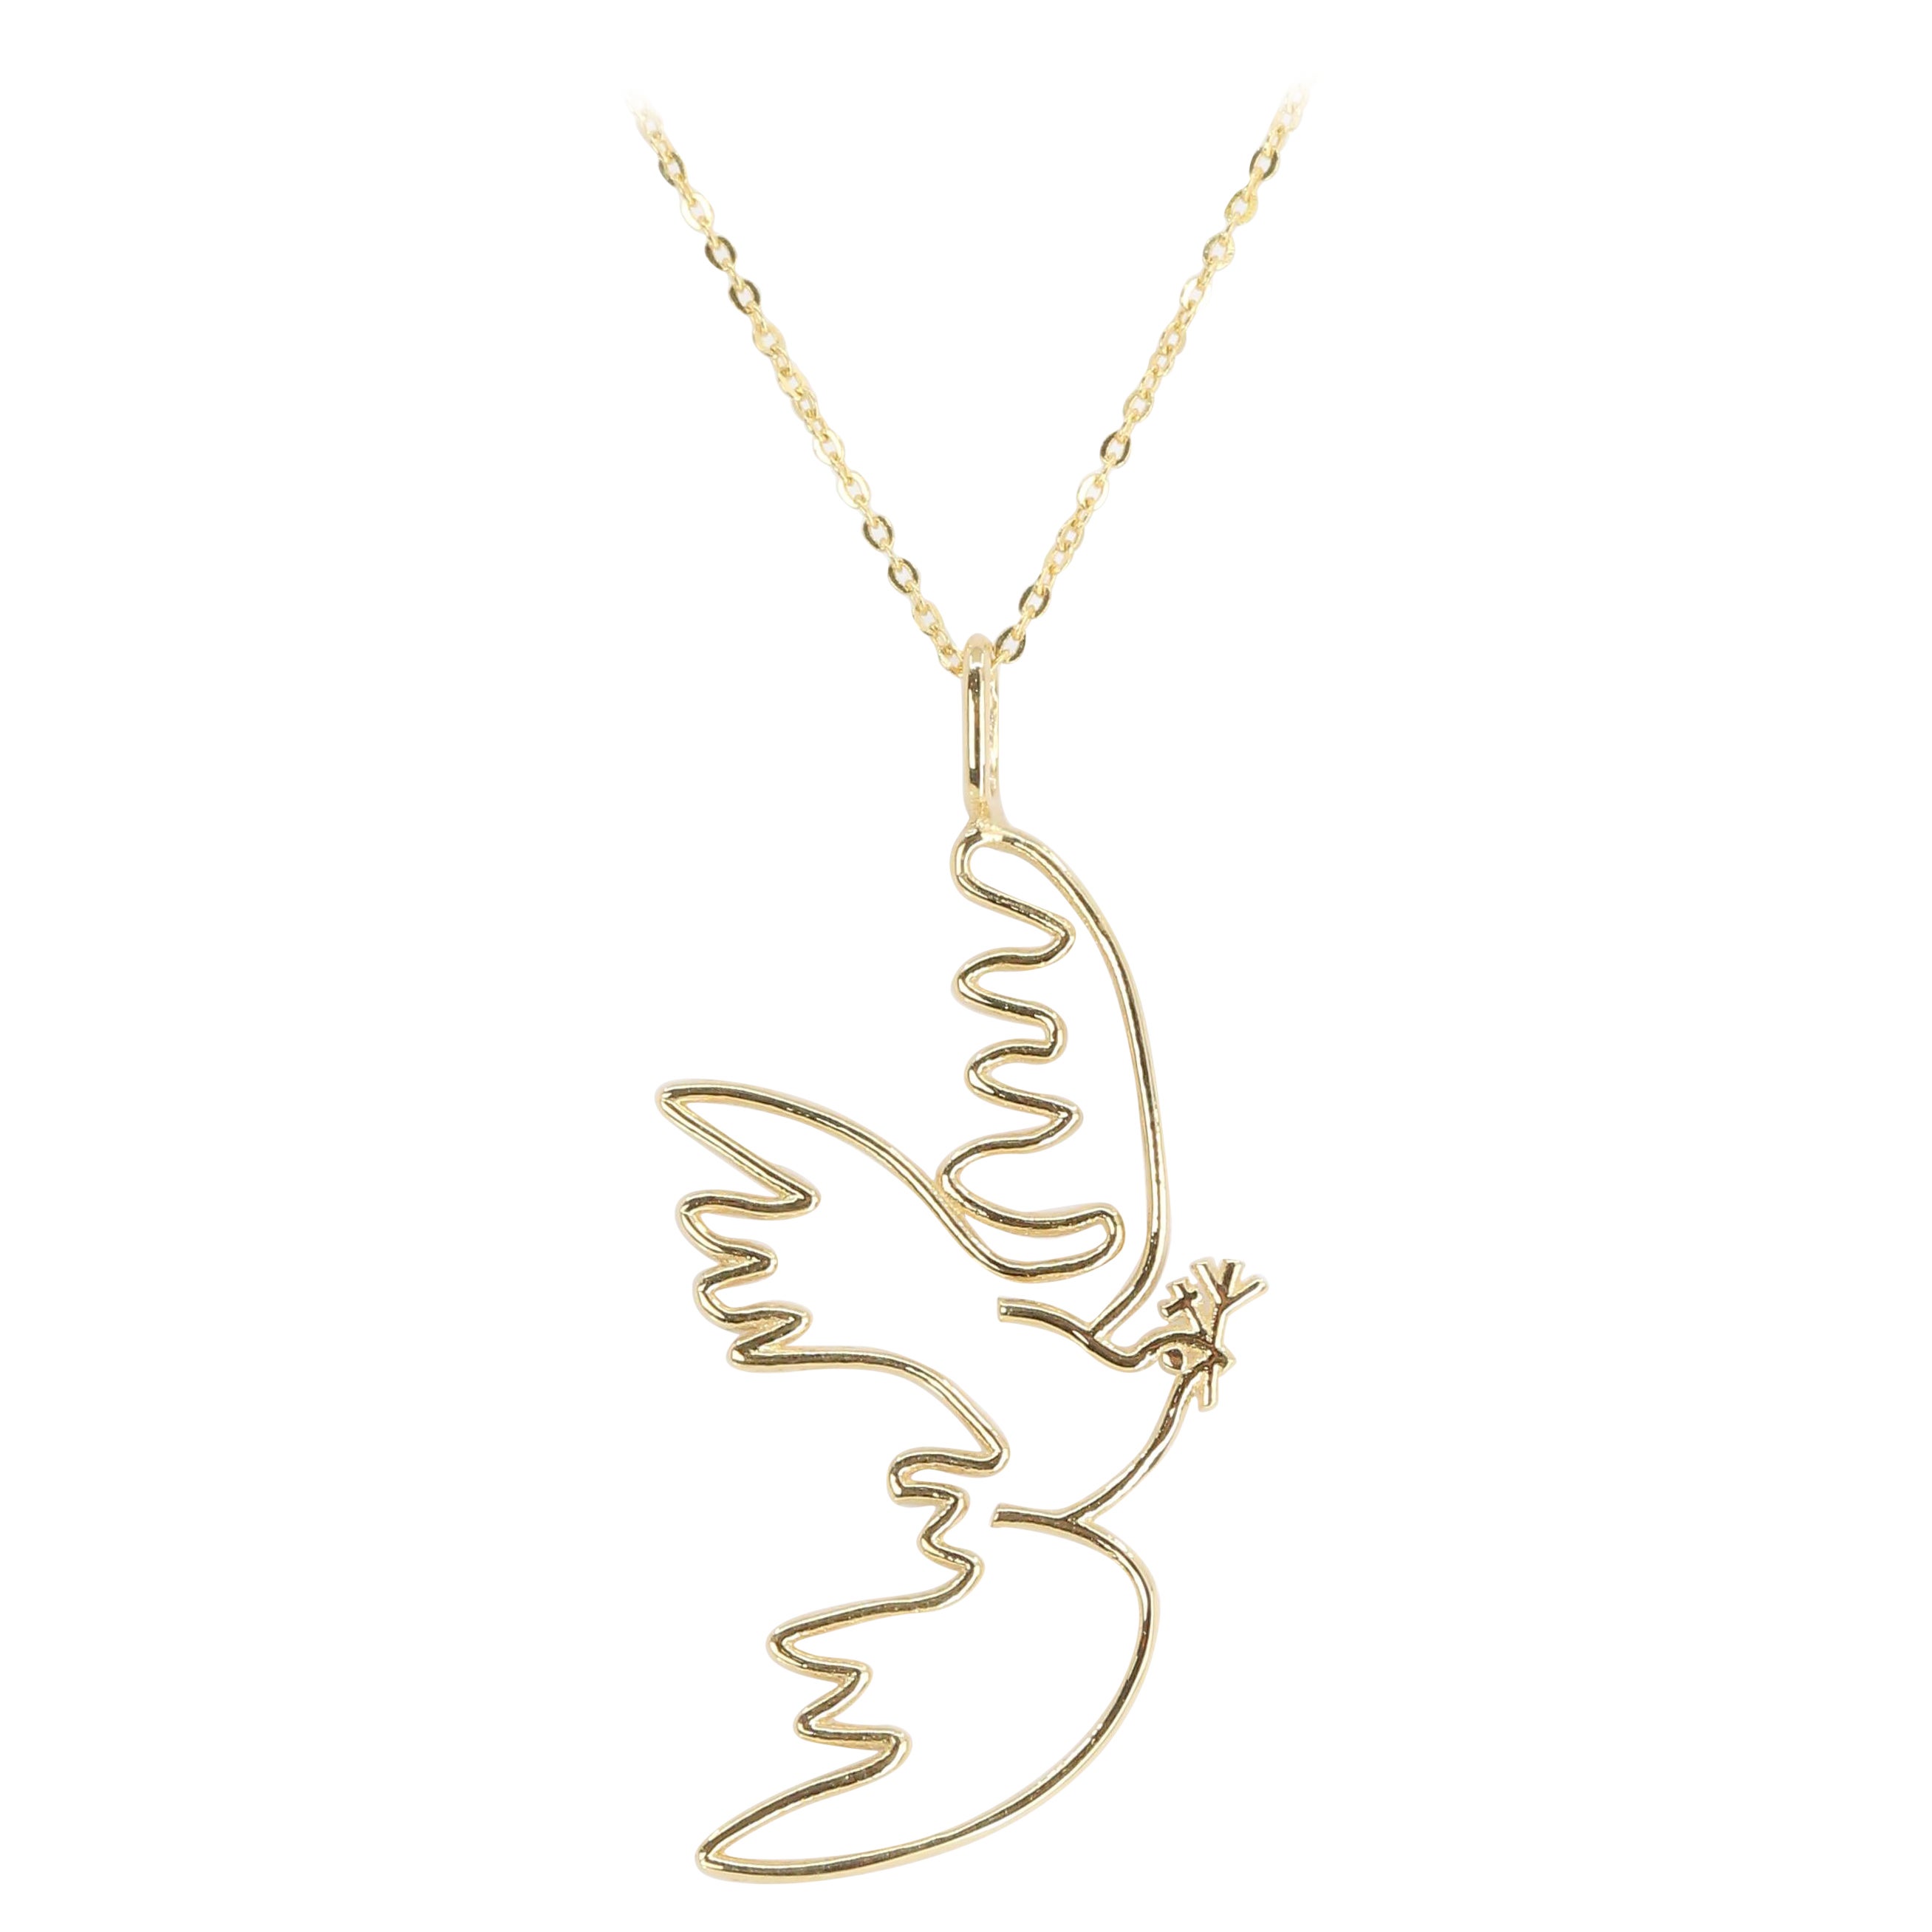 14K Gold Cubic Dove Necklace, Inspired by Picasso's "For a Beautiful Spring"